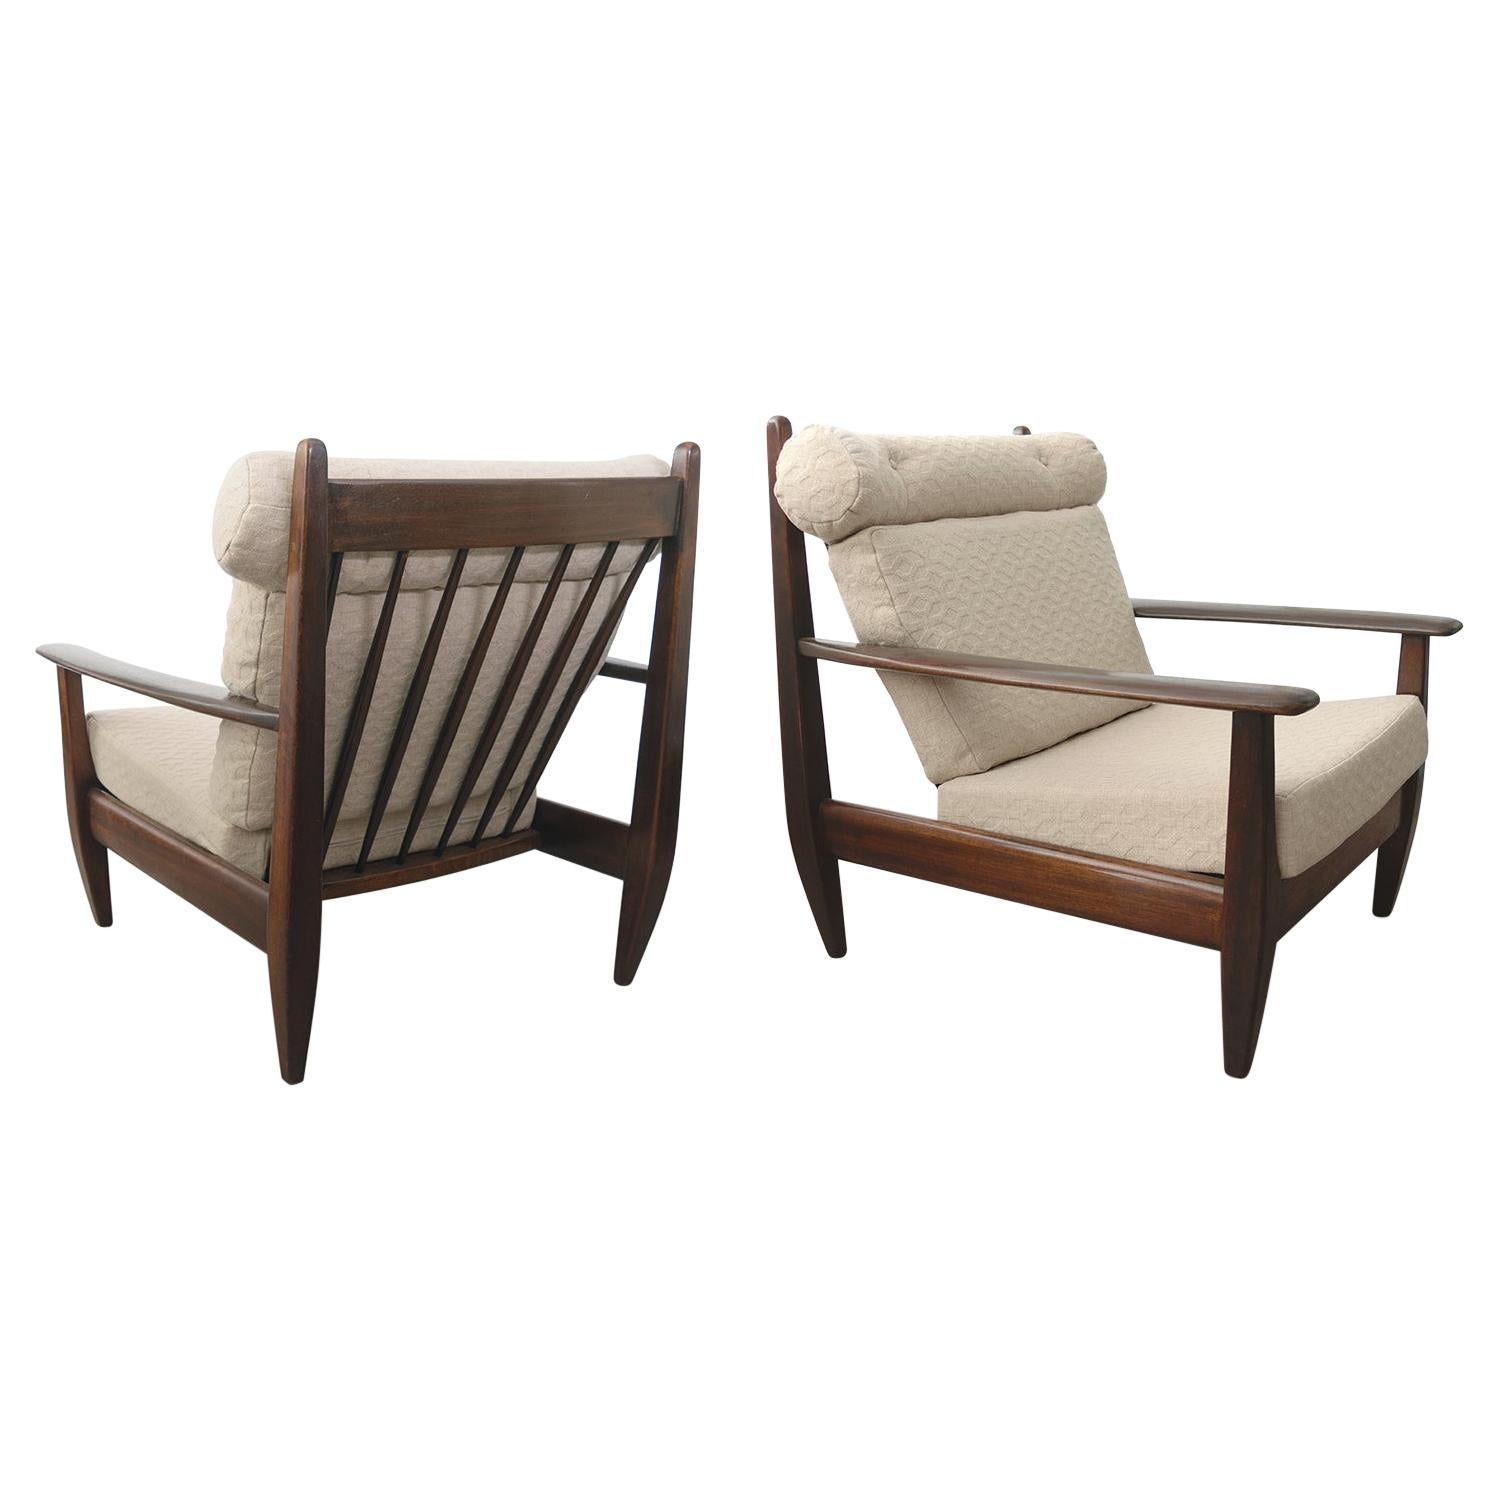 Brazilian Pair of Lounge Chairs in Carved Solid Teak, 1960'S